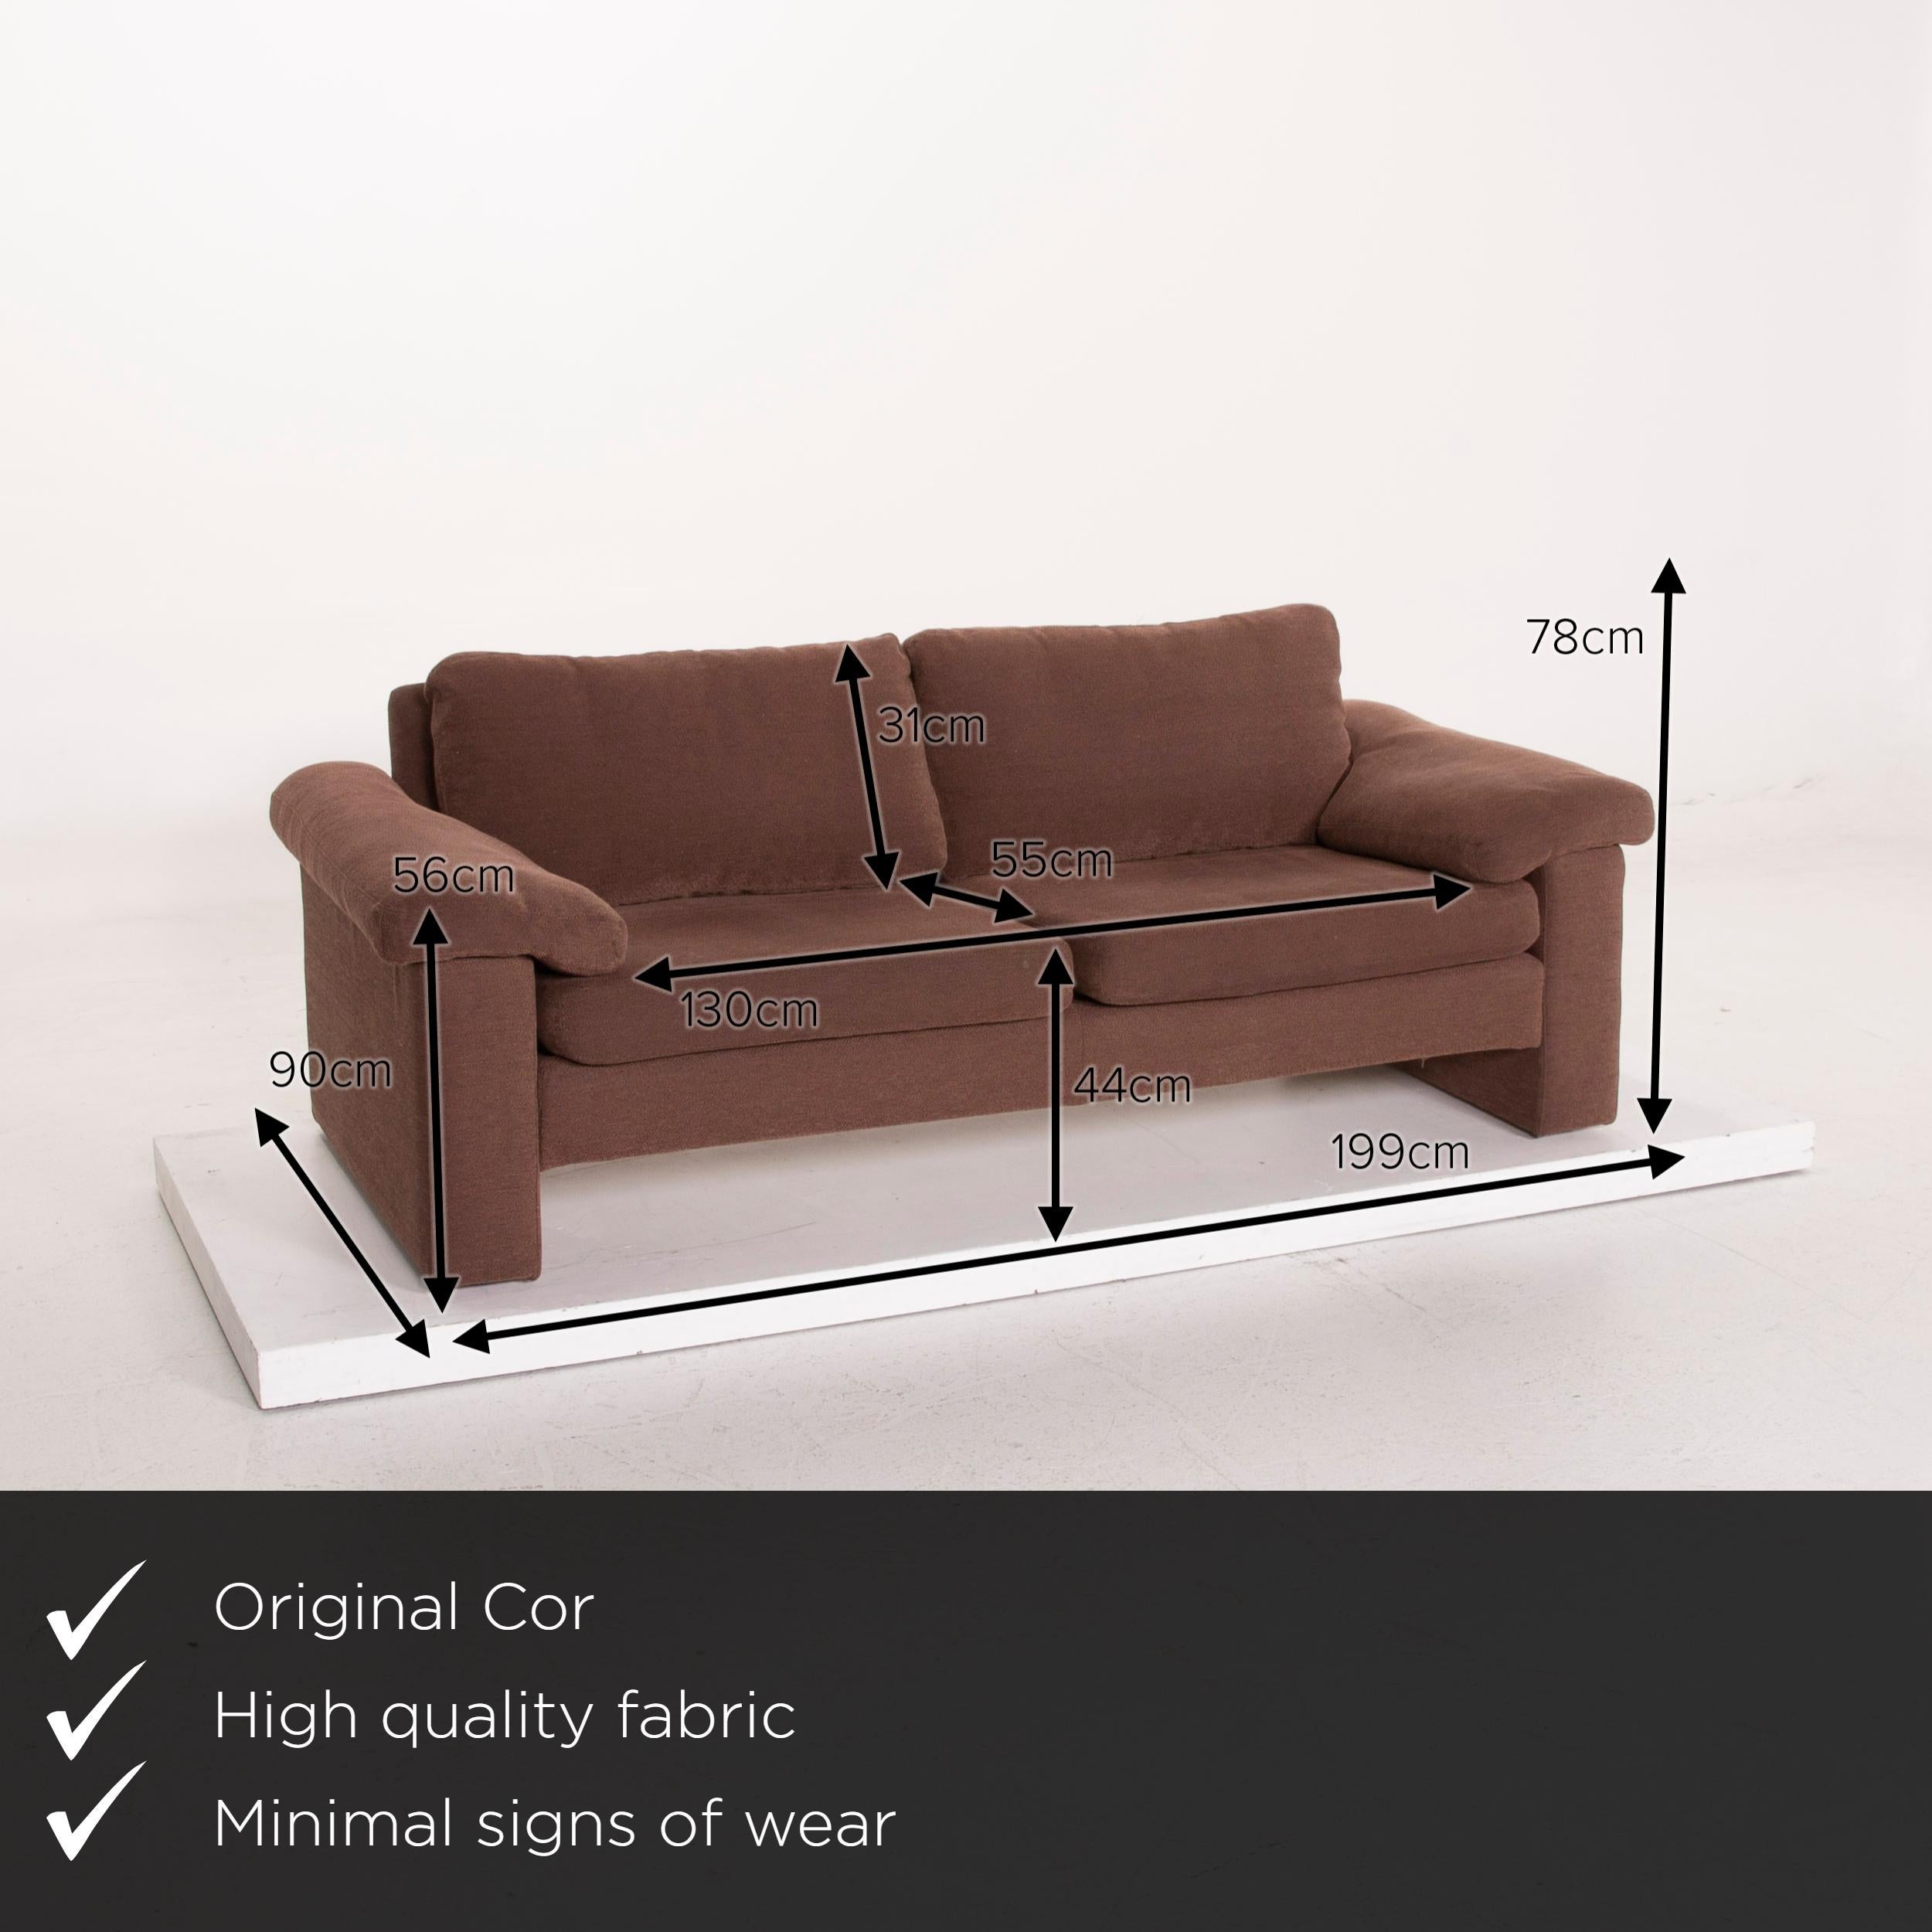 We present to you a COR Conseta fabric sofa brown three-seat.


 Product measurements in centimeters:
 

Depth 97
Width 85
Height 107
Seat height 46
Rest height 58
Seat depth 56
Seat width 57
Back height 63.
 